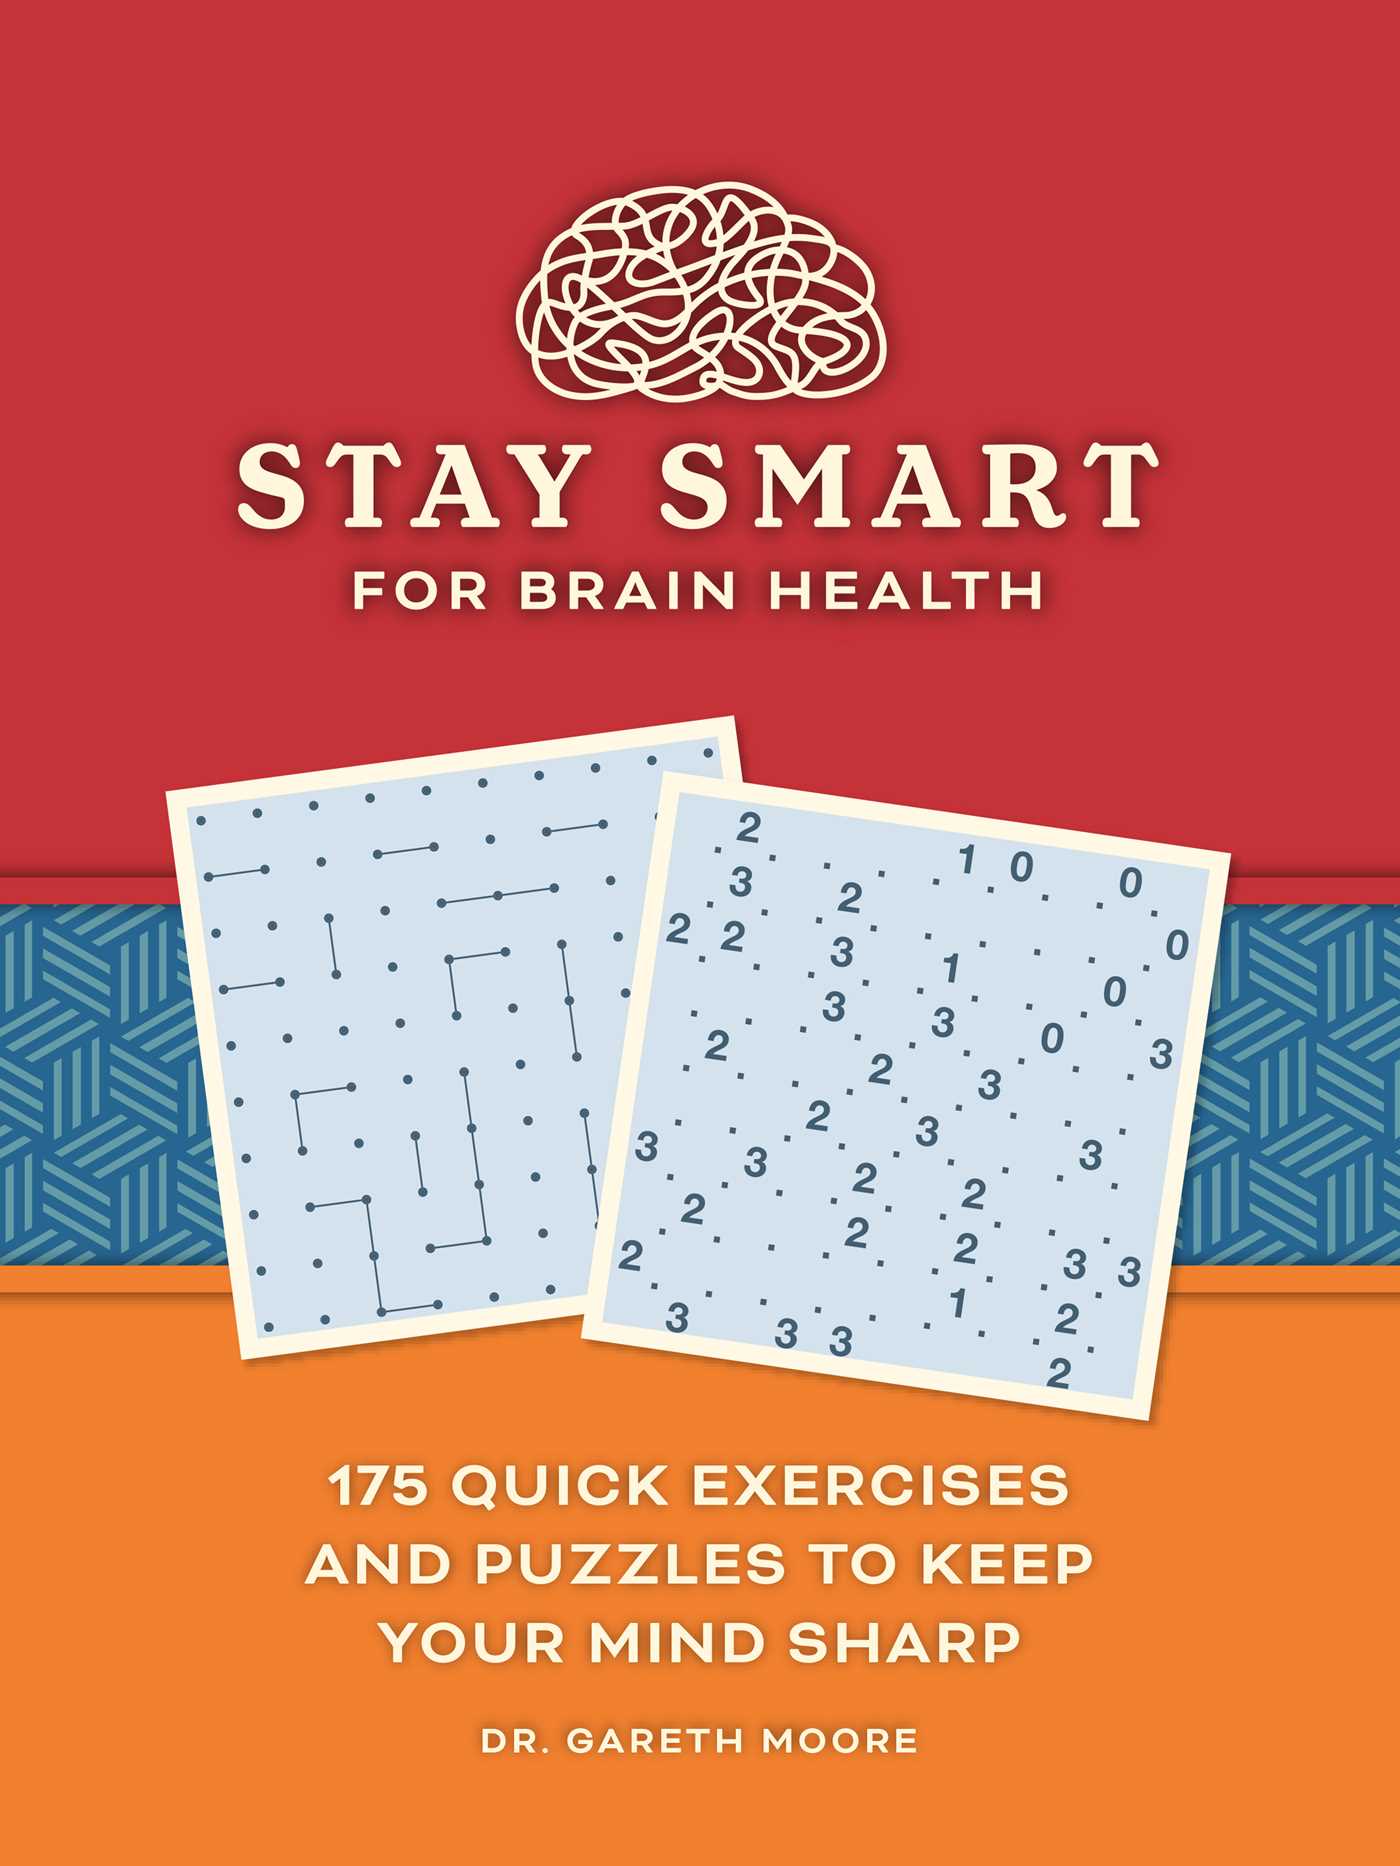 Stay Smart for Brain Health